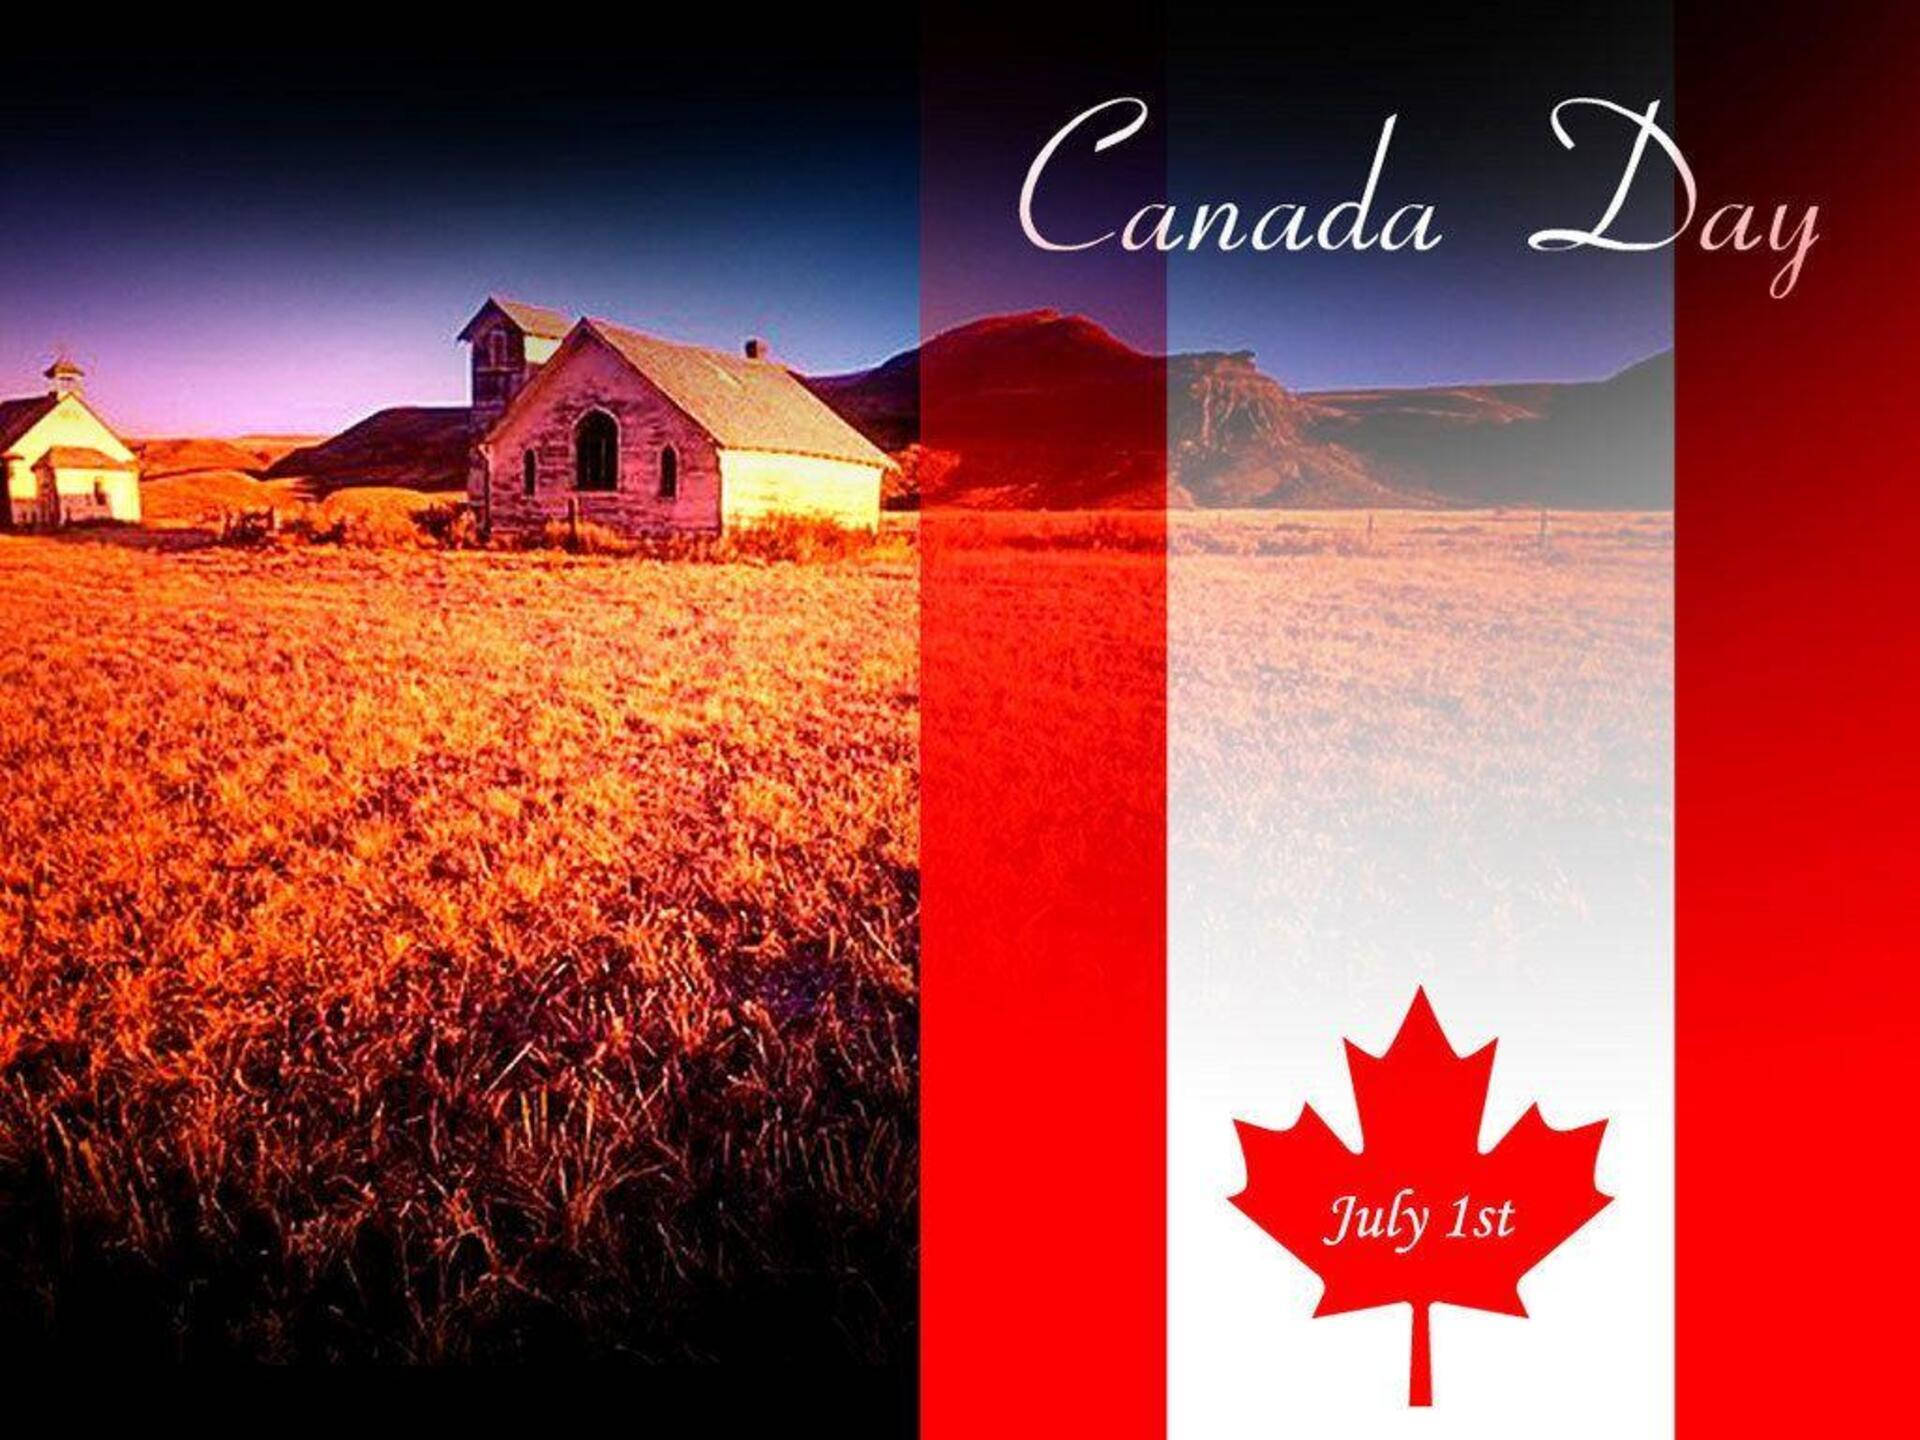 Canada Day July 1st